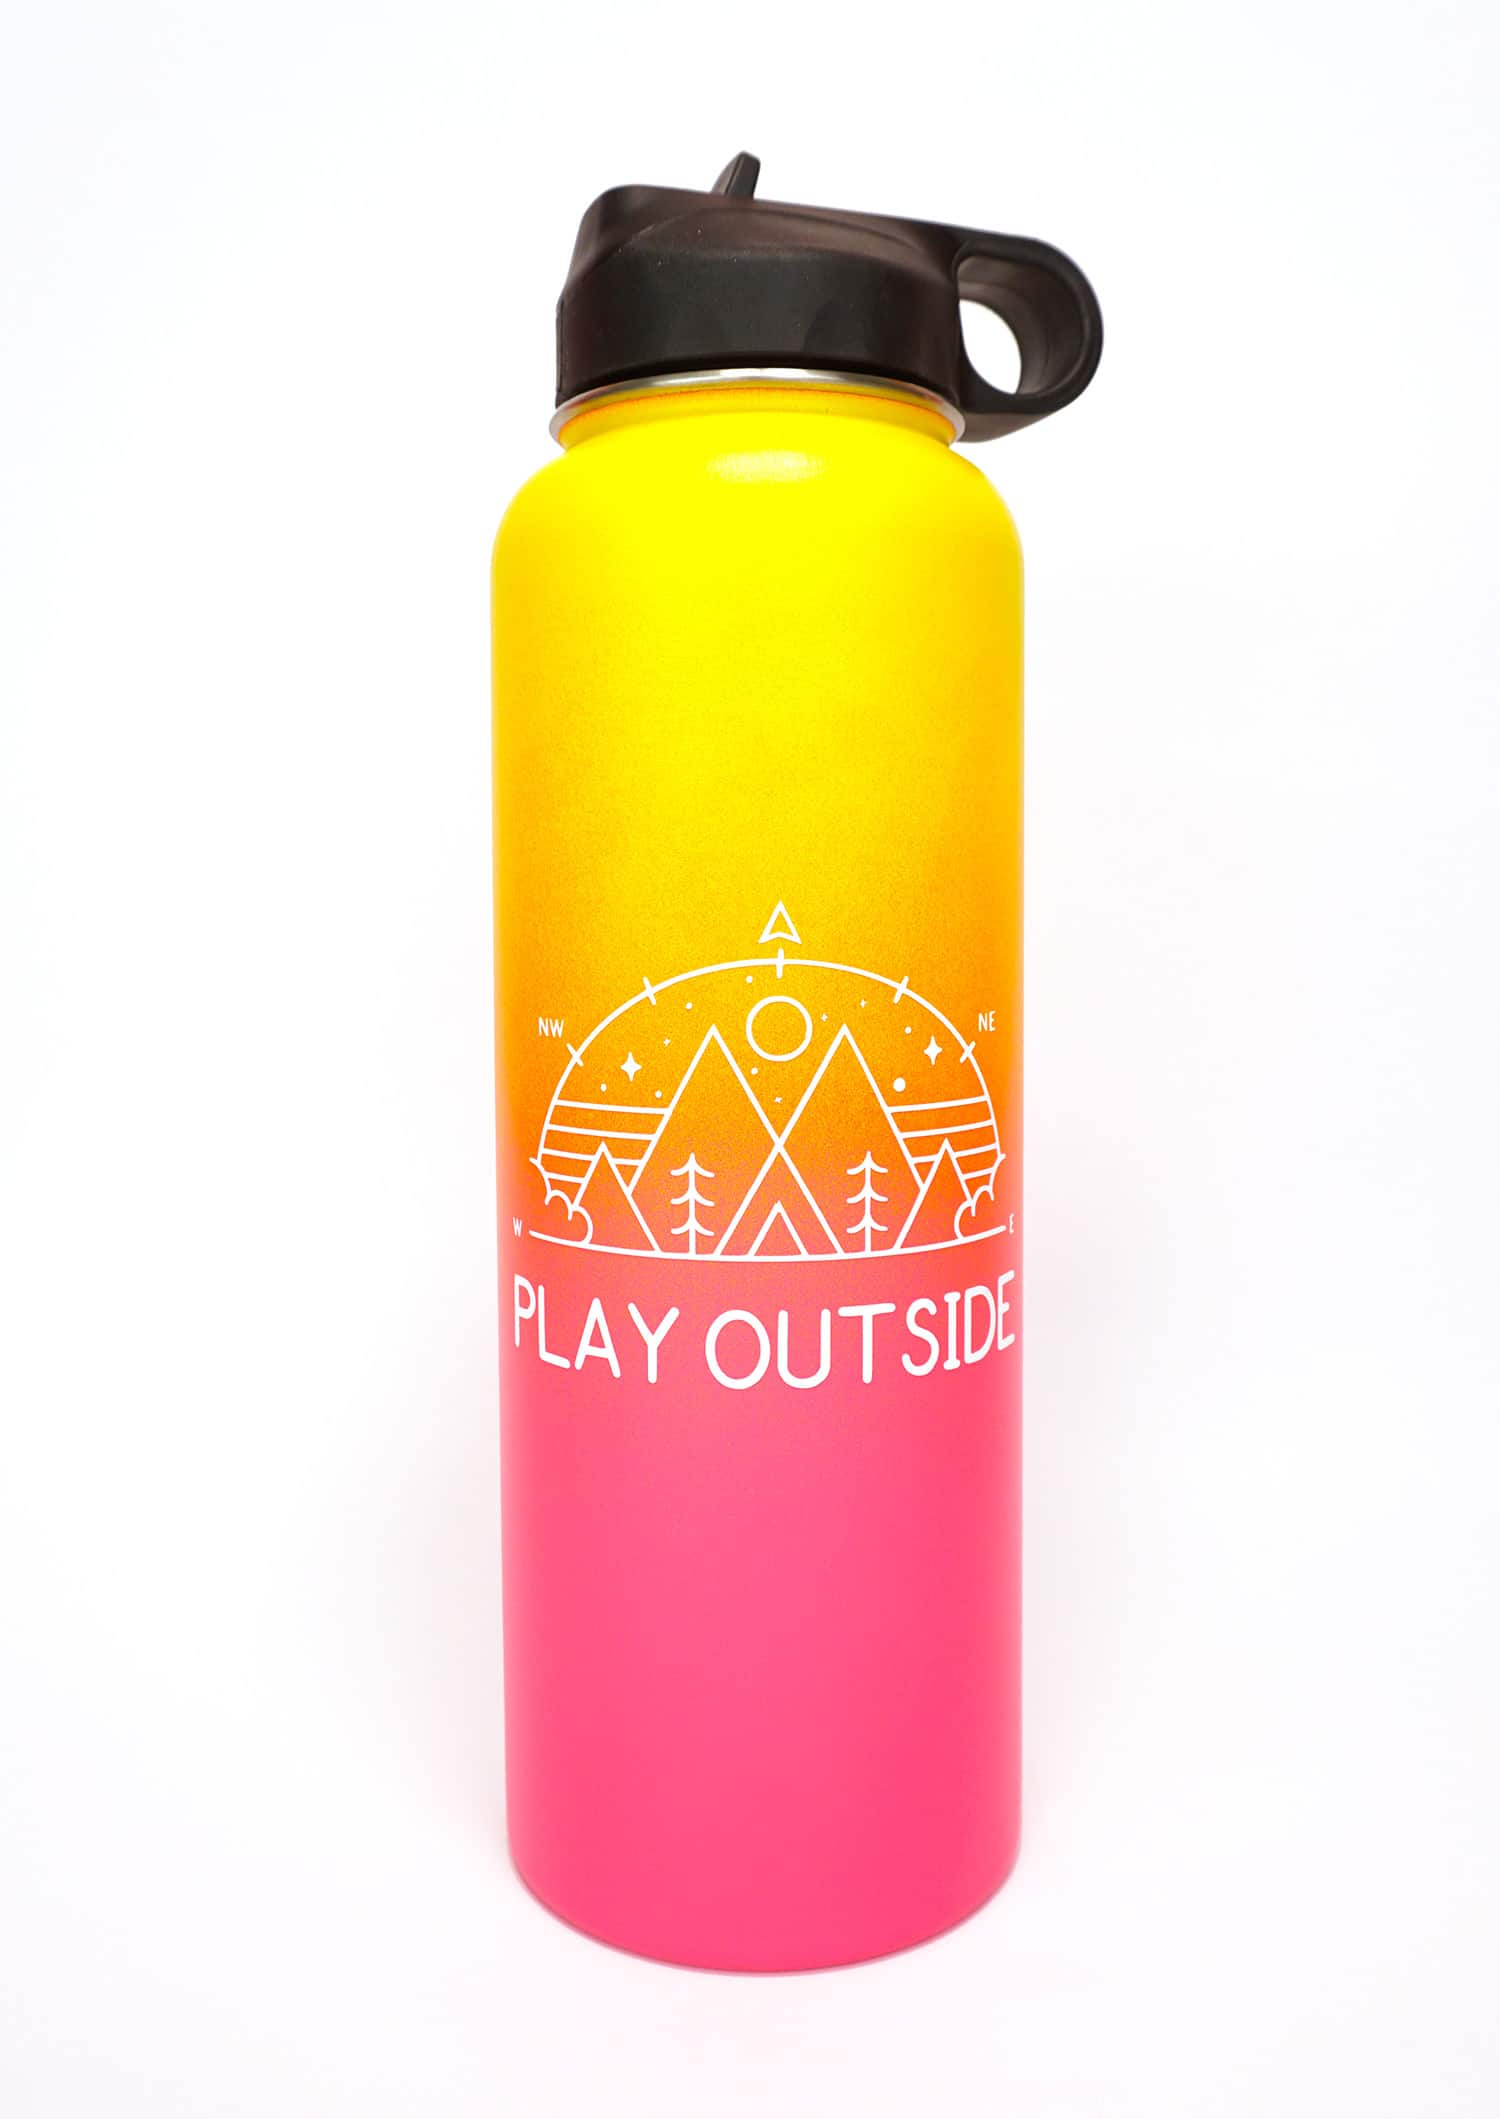 Ready-Made Cricut Project - Add Vinyl Decals to a Water Bottle